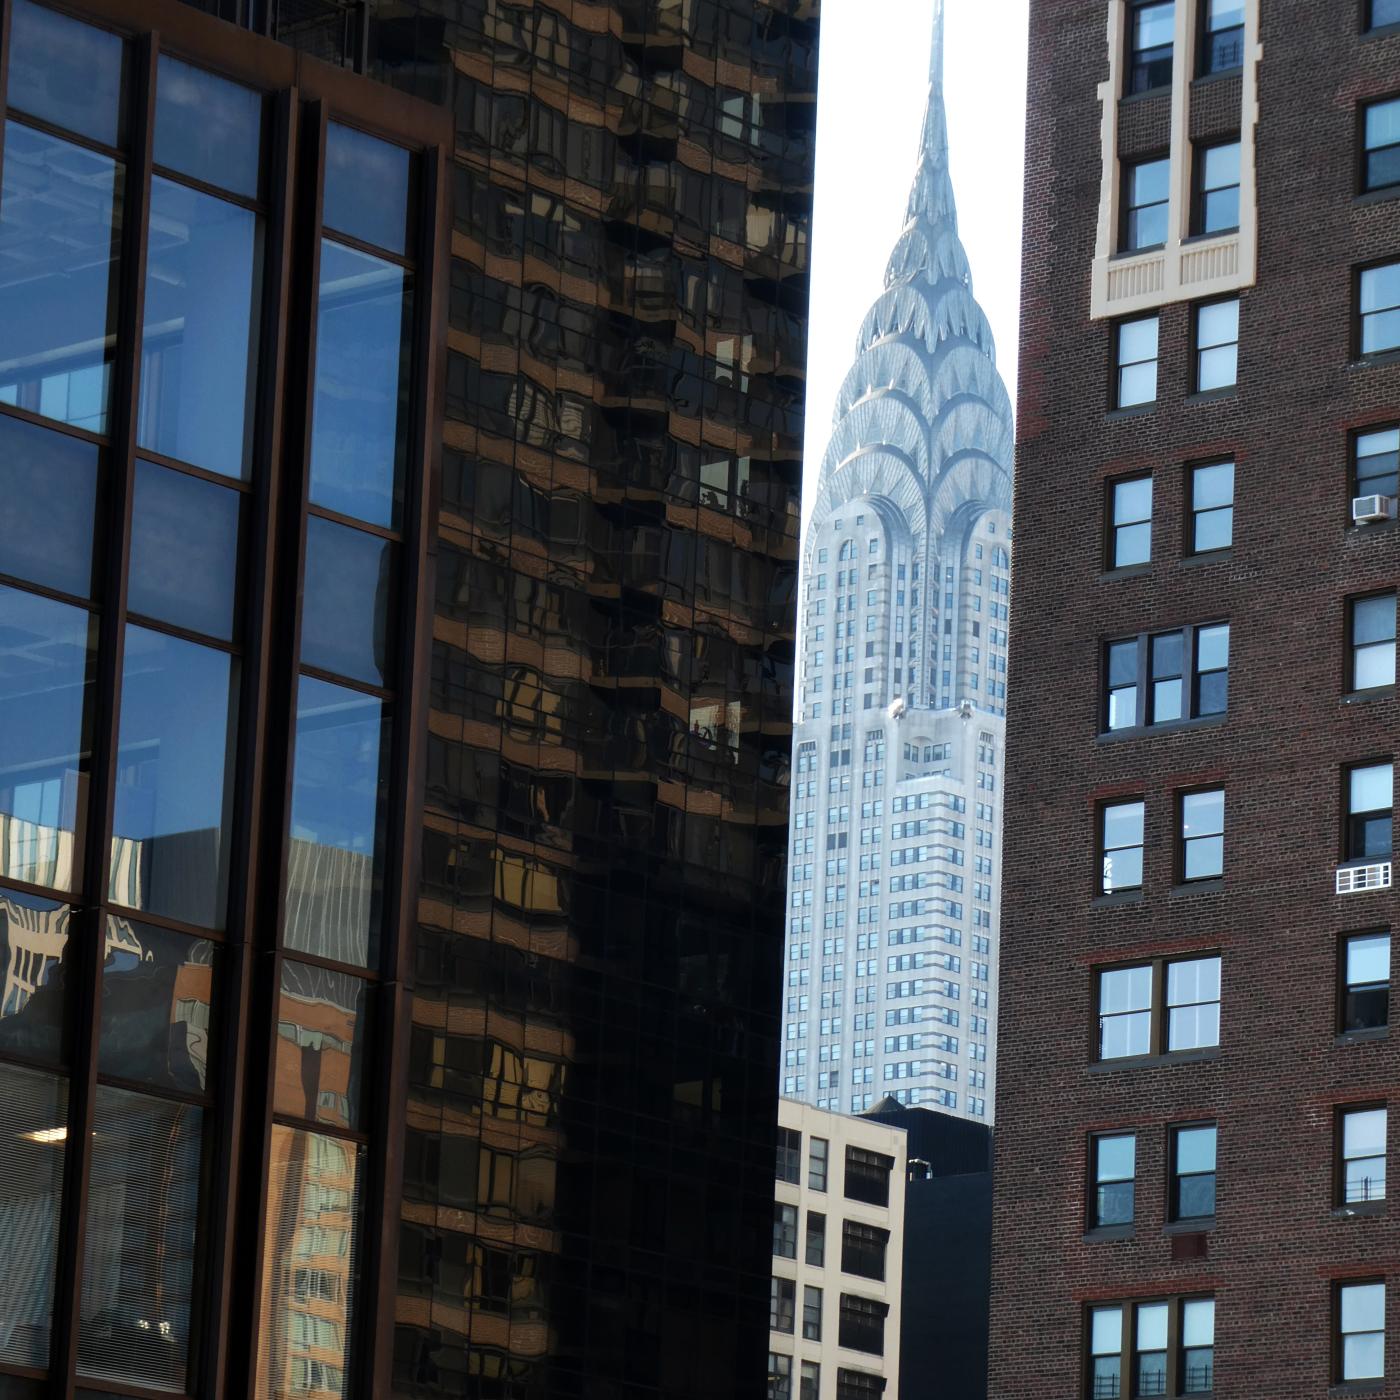 Chrysler Building | Buy this image